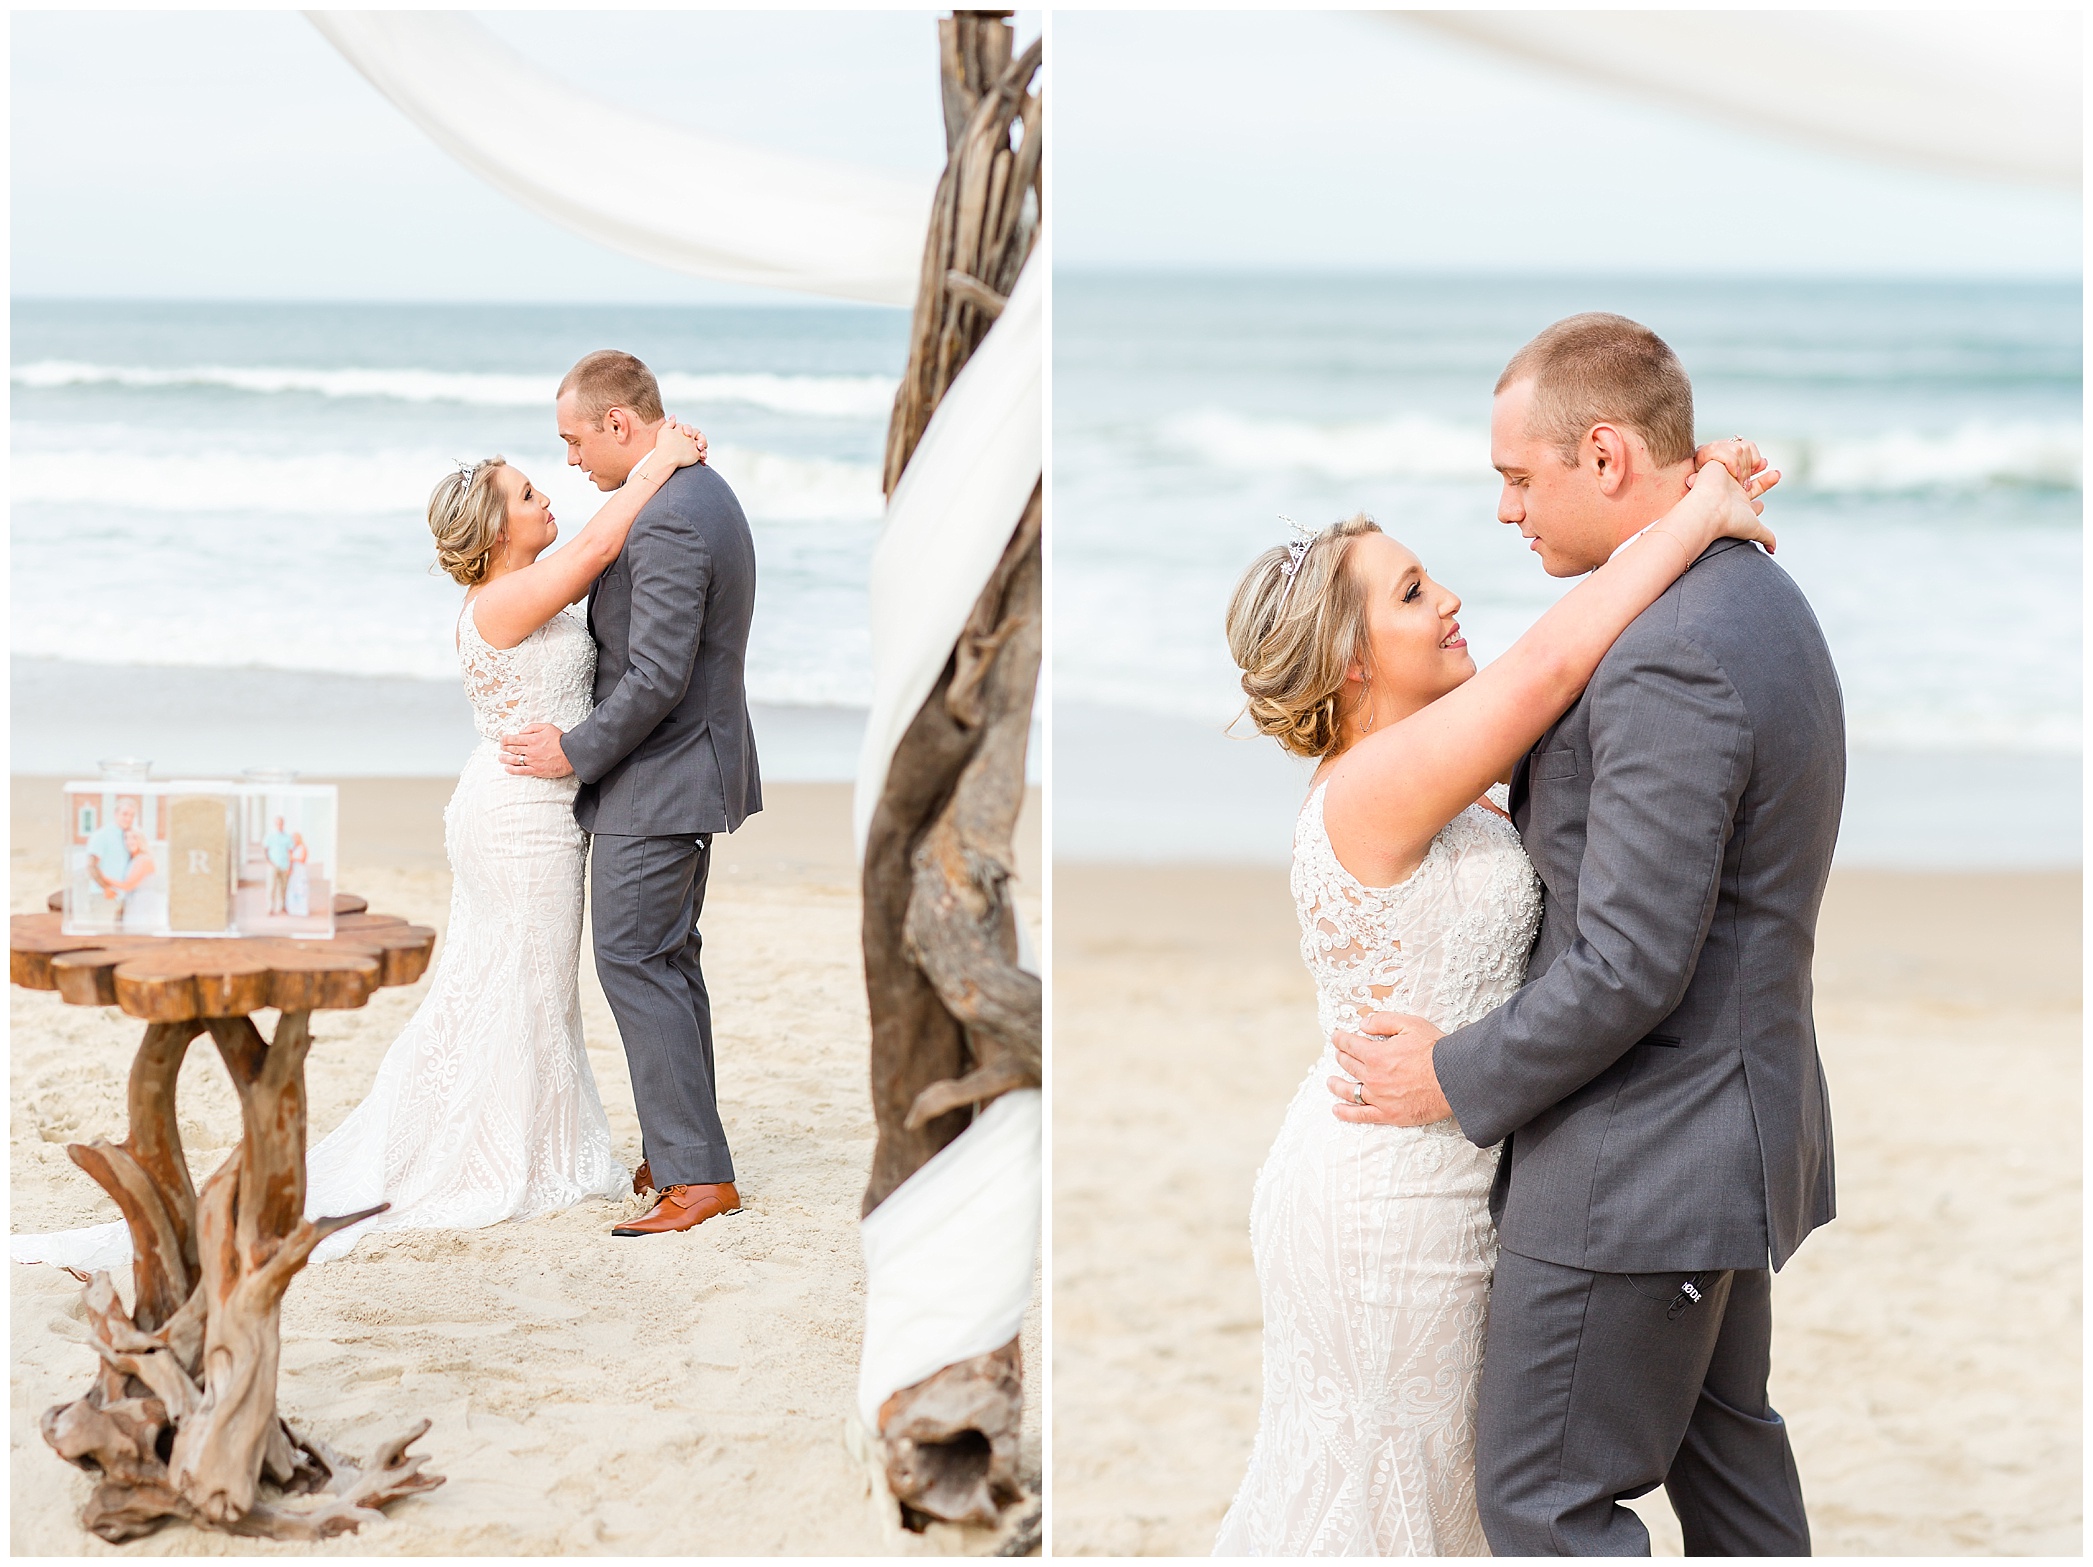  Nick and Chalsy shared a dance together on the beach right after they said “ I Do ! “  